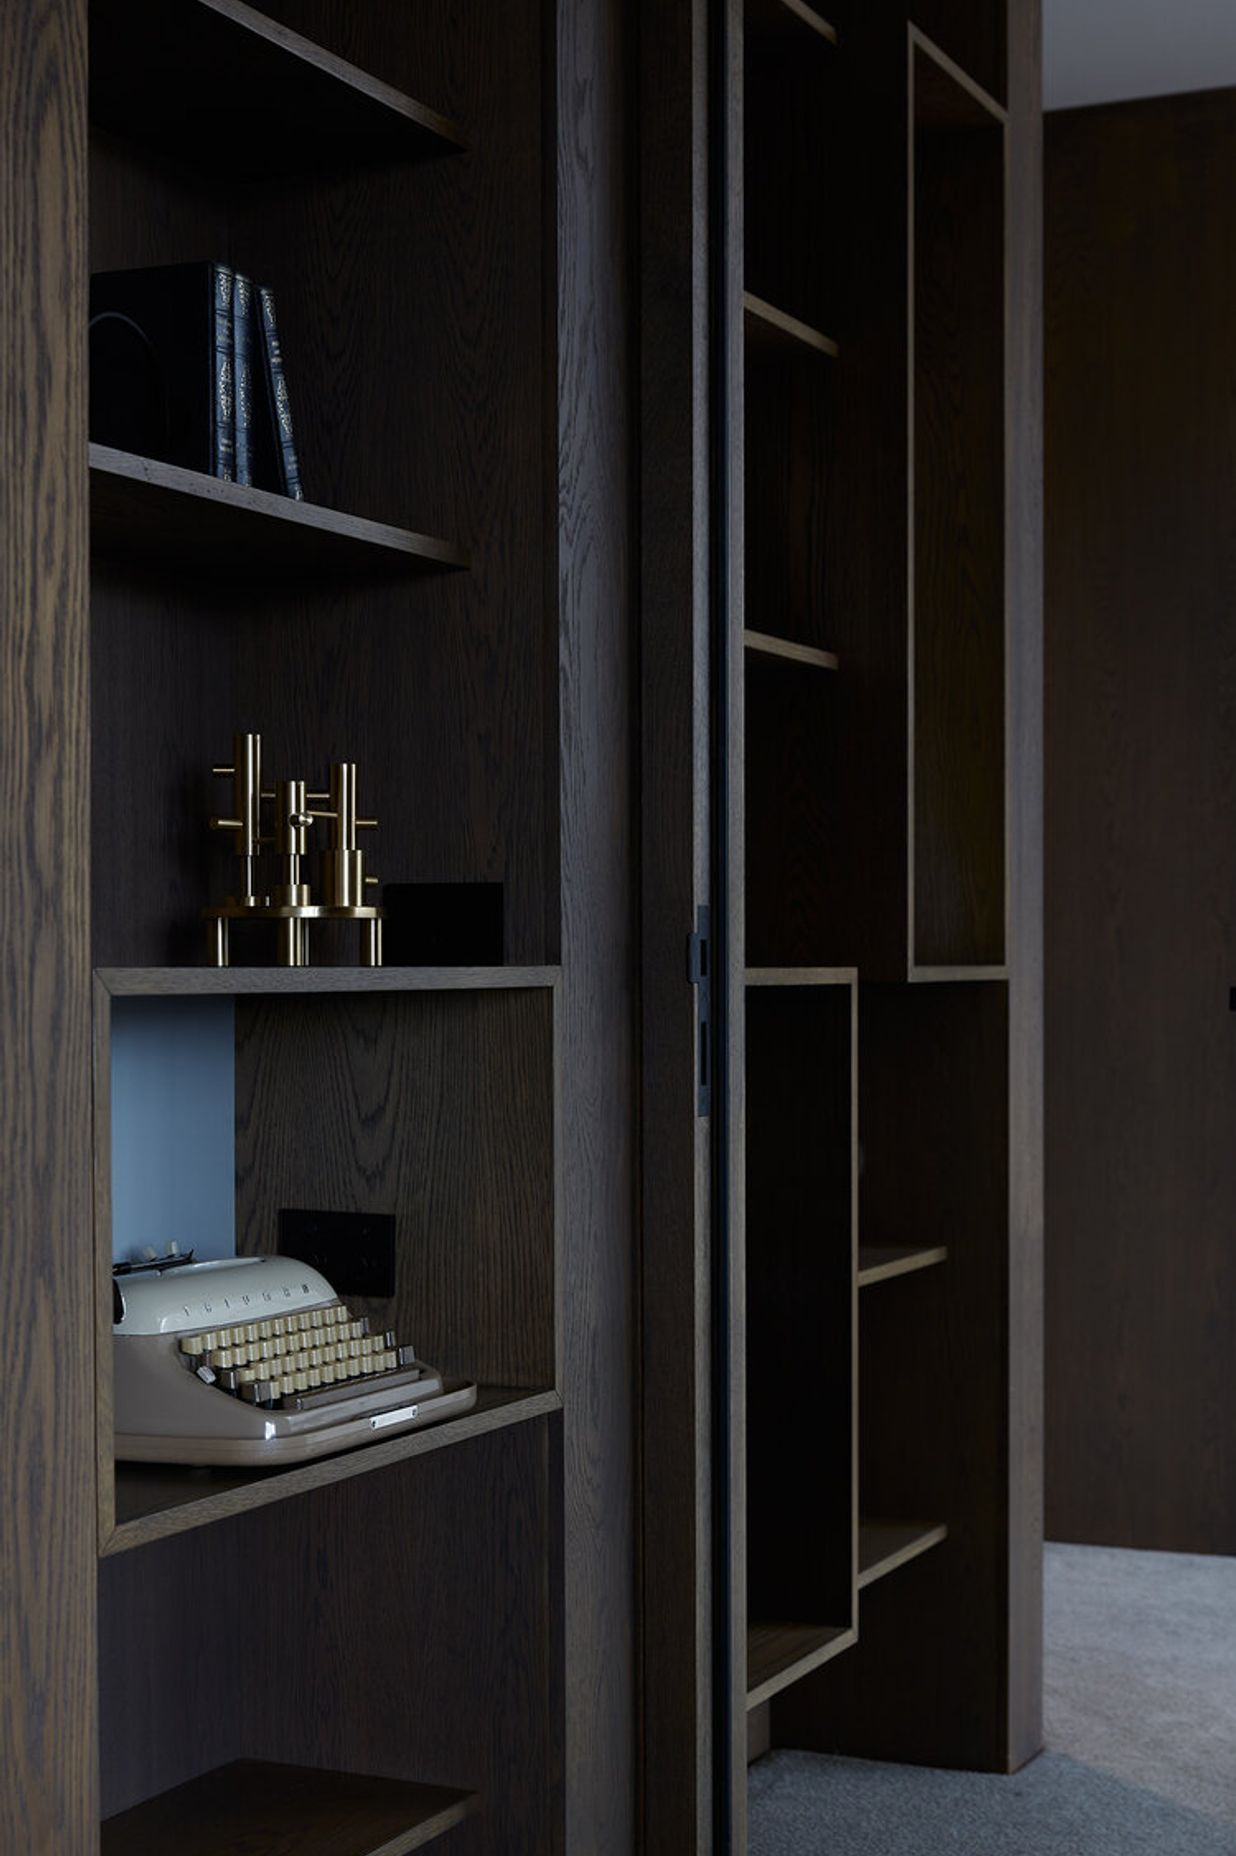 Built-in display cabinetry with a dark, wood-grain laminate is a nod to the Modernists.